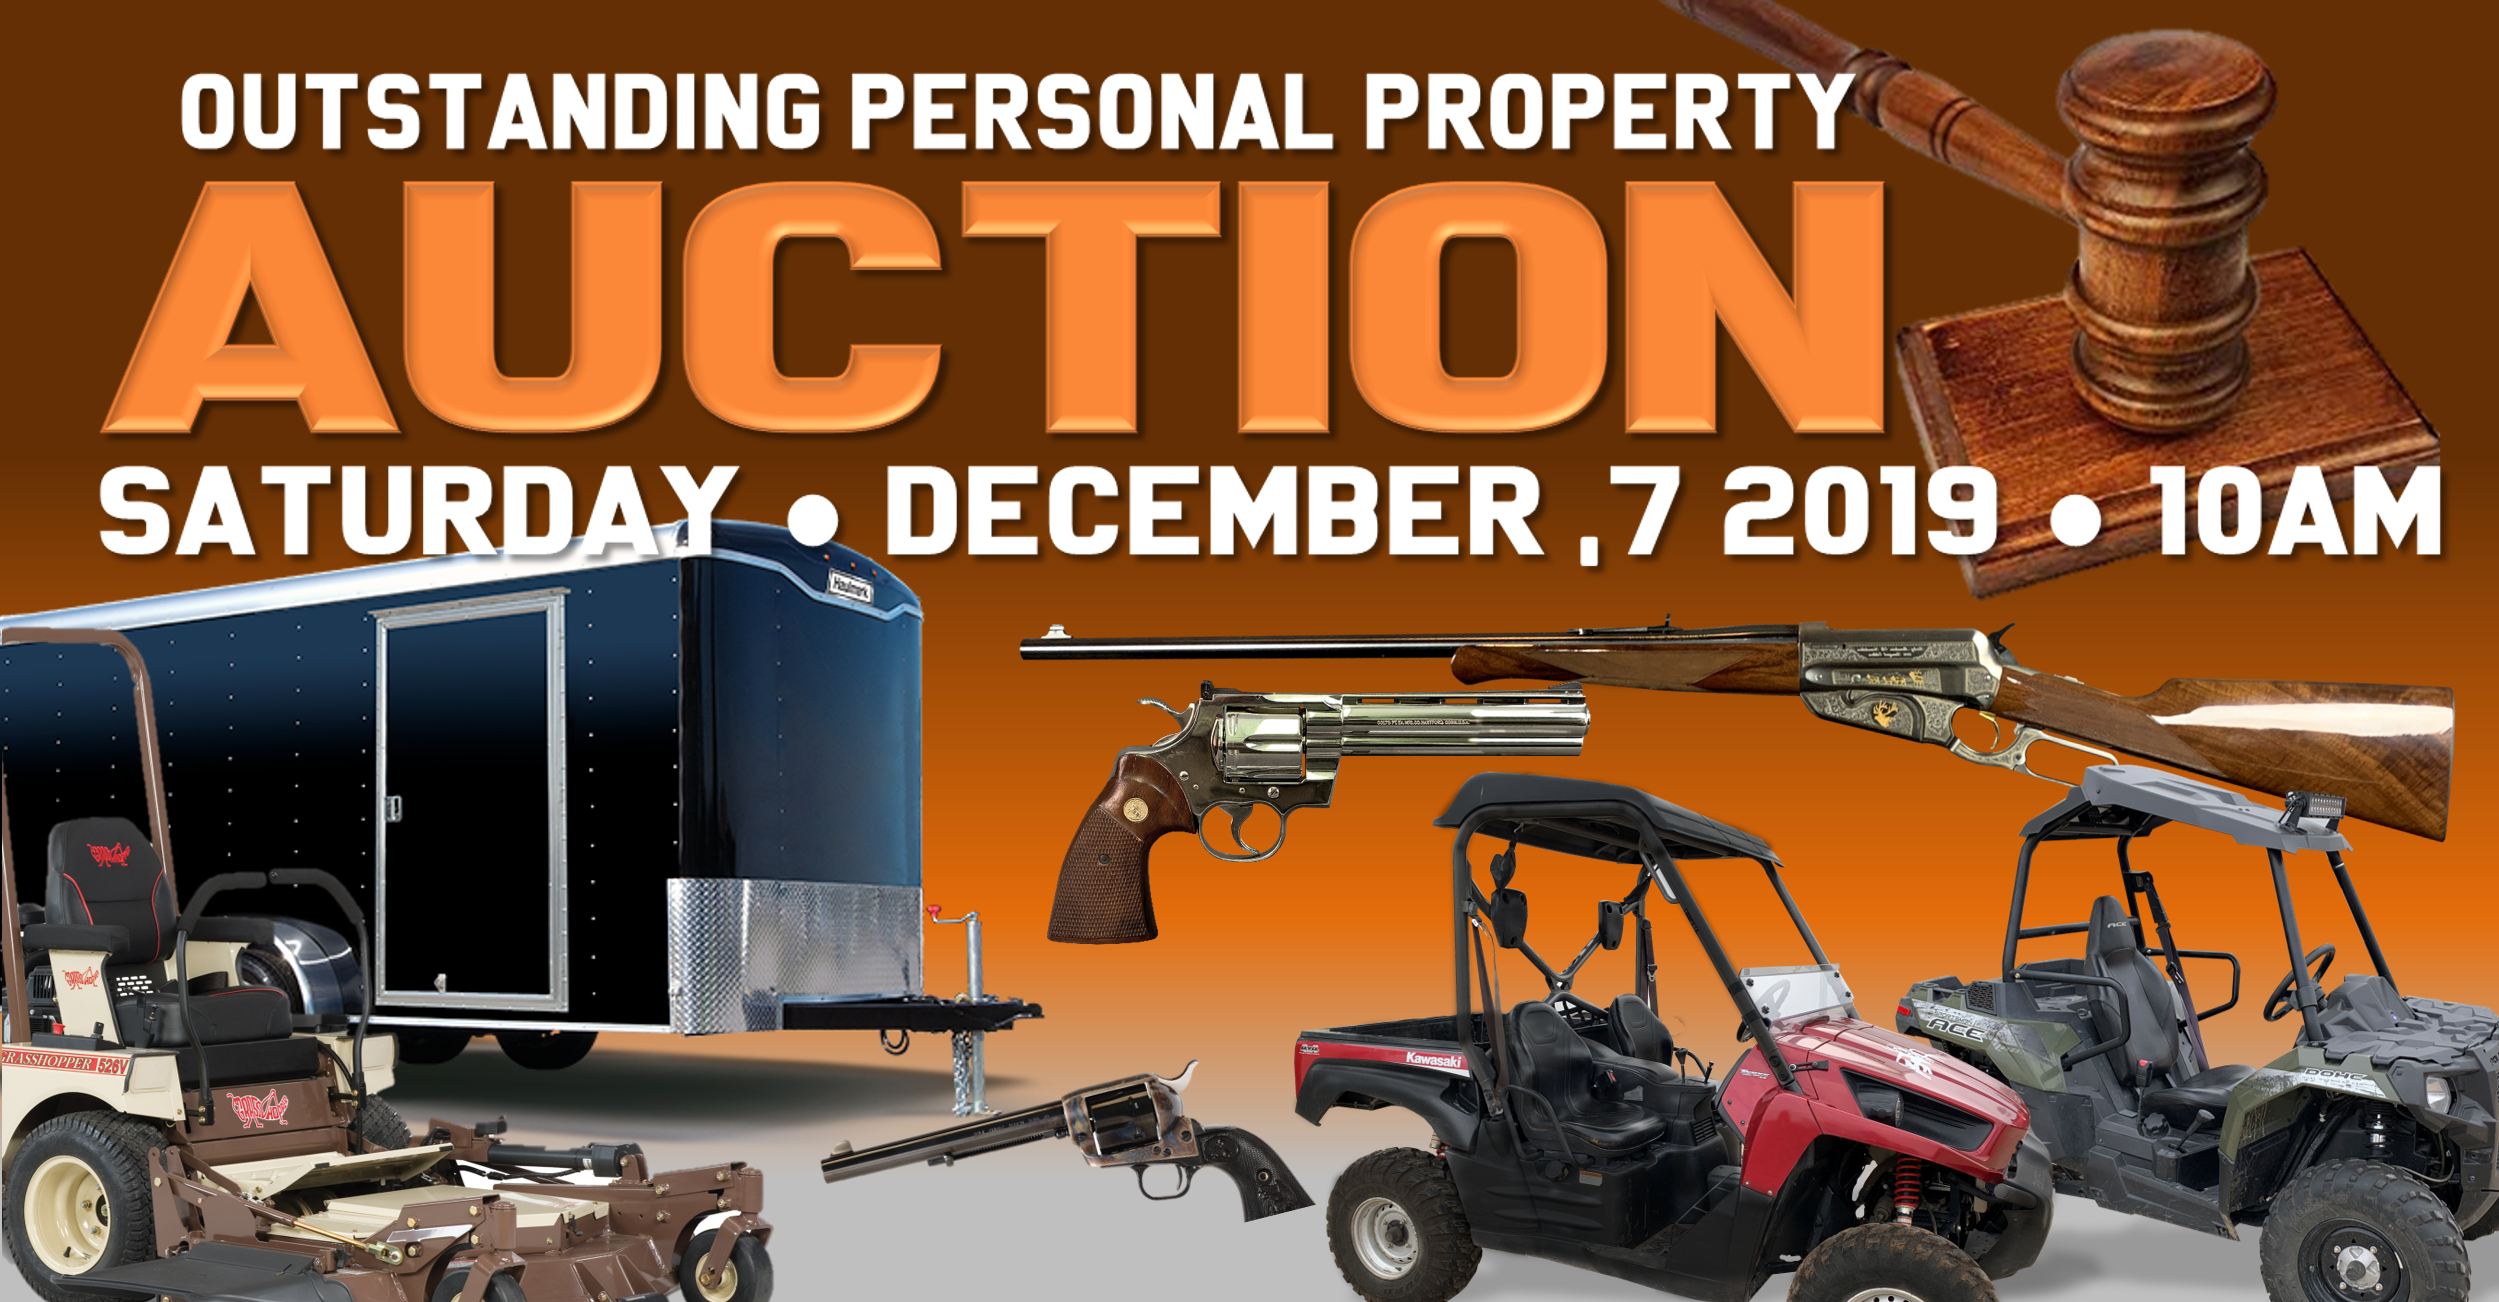 OUTSTANDING PERSONAL PROPERTY AUCTION